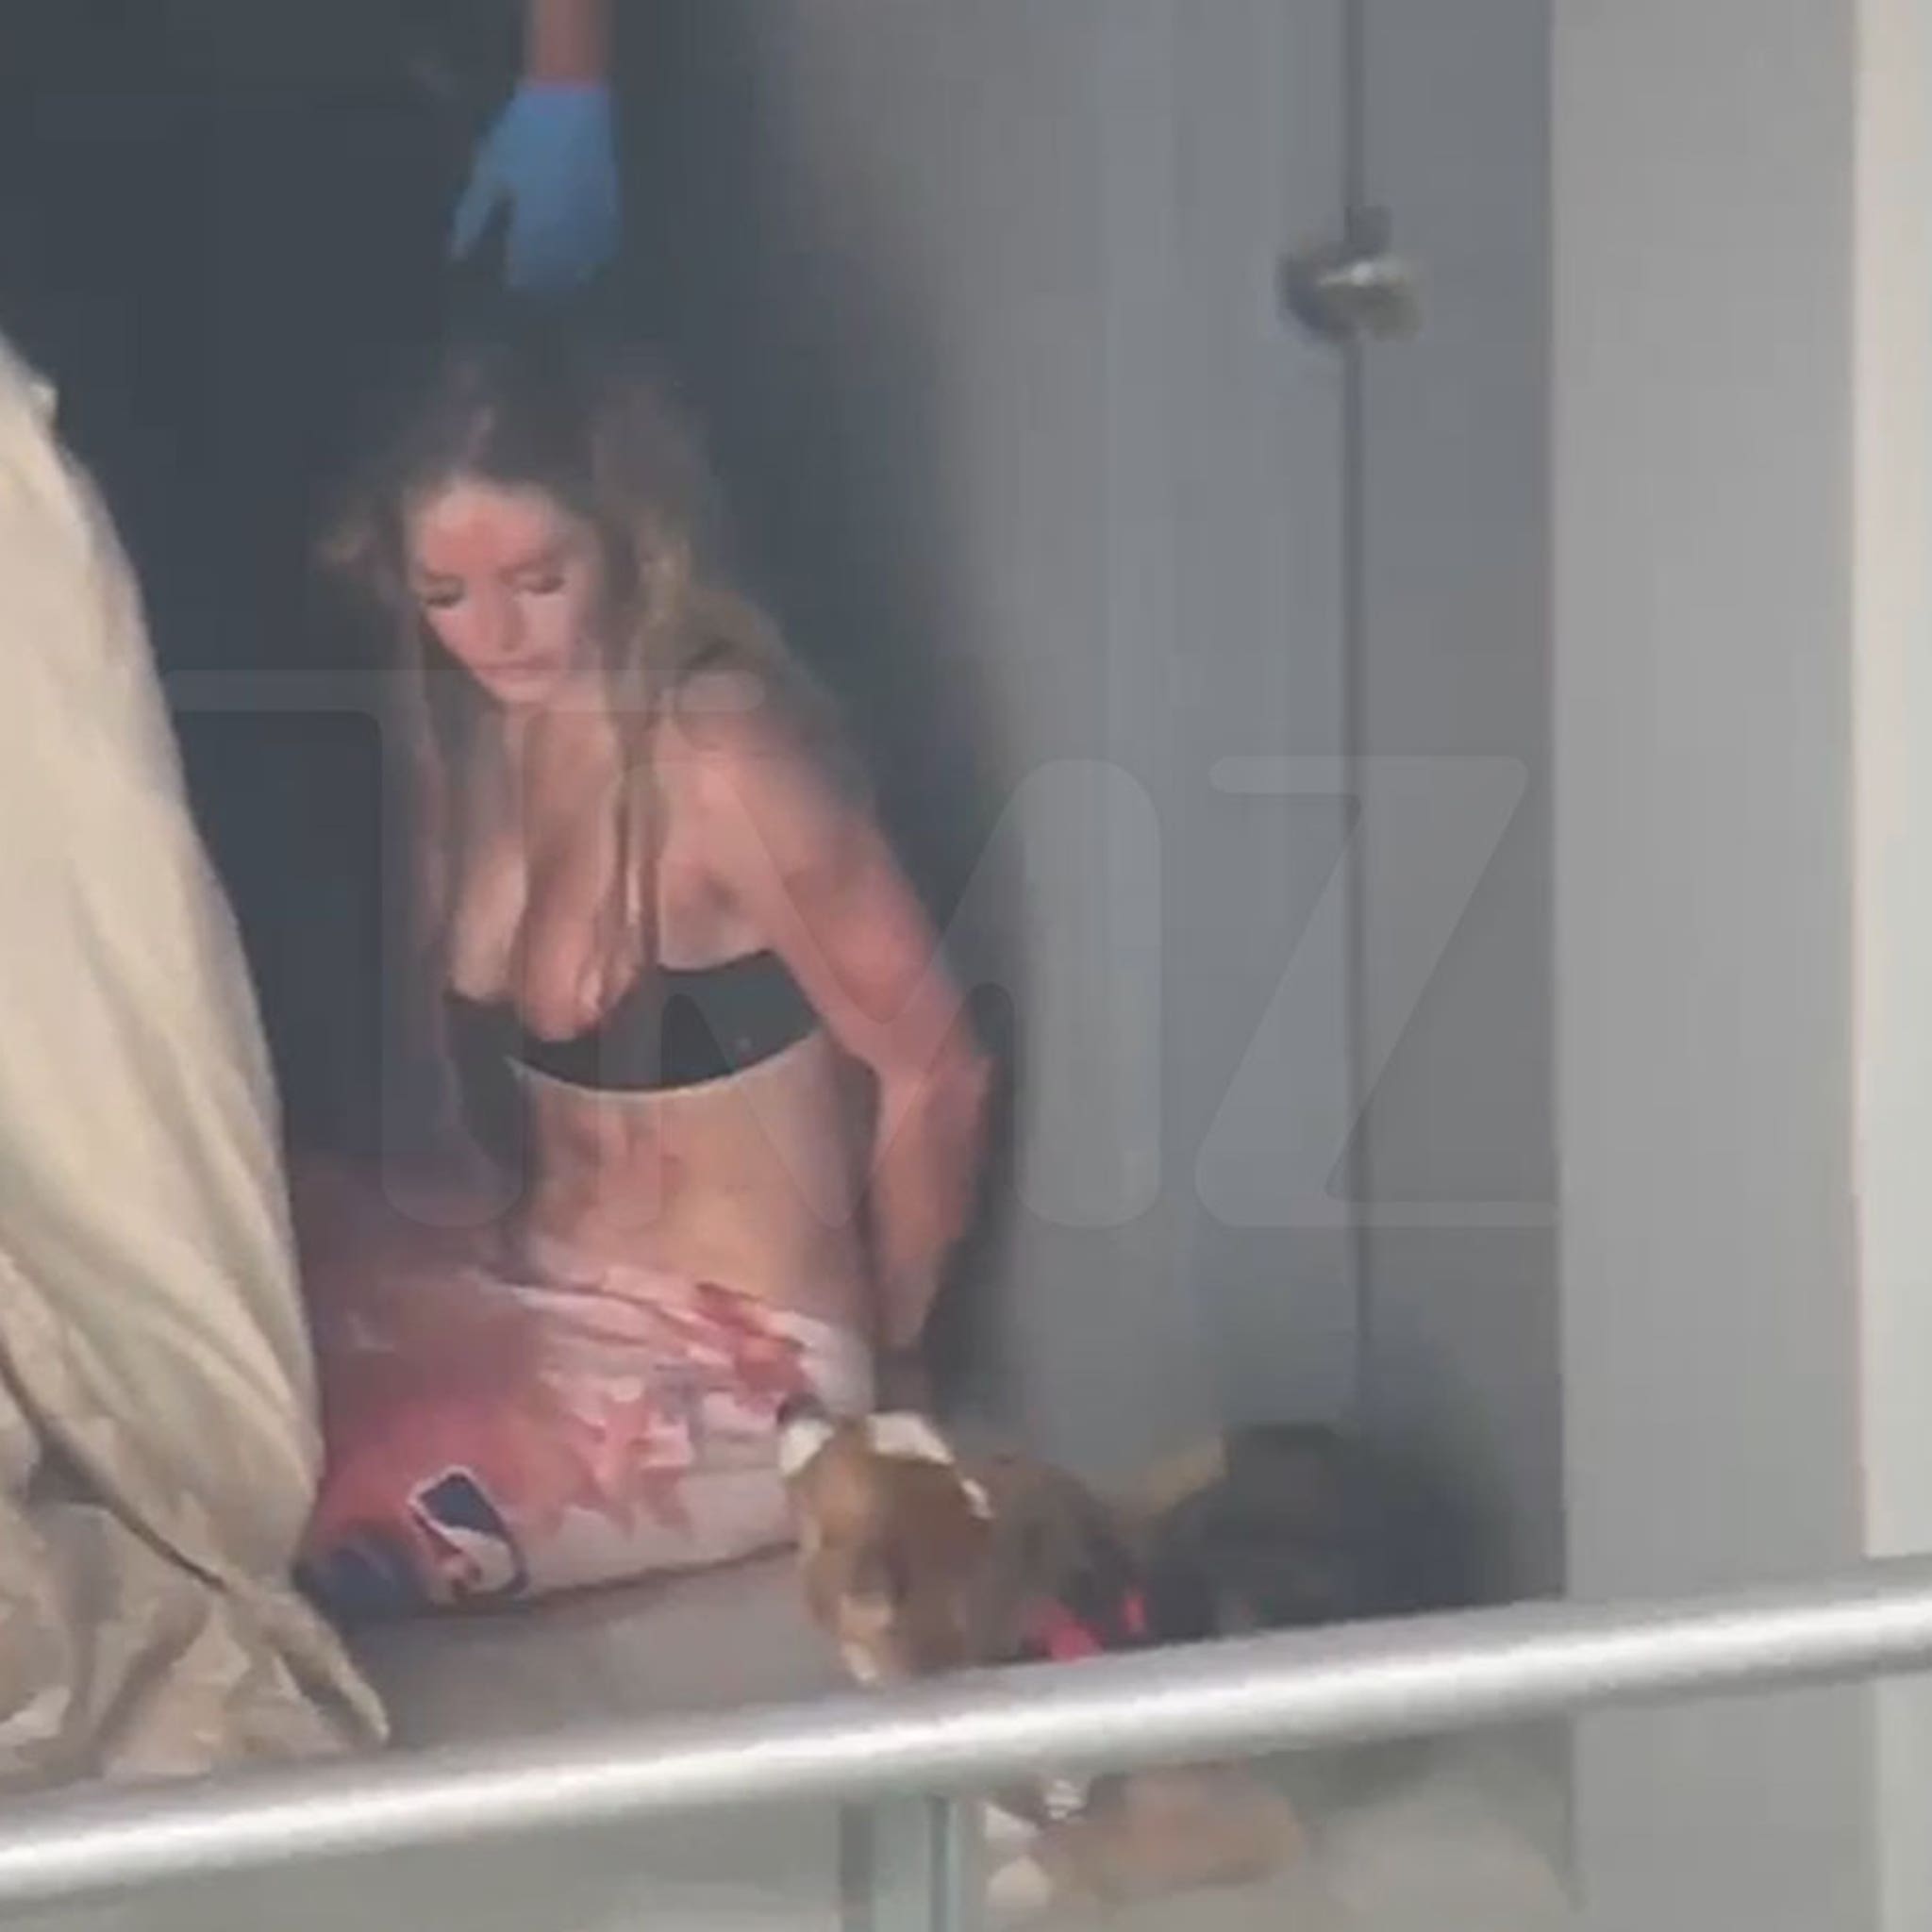 Video From Fatal Miami Stabbing Shows IG Model Covered In Blood image